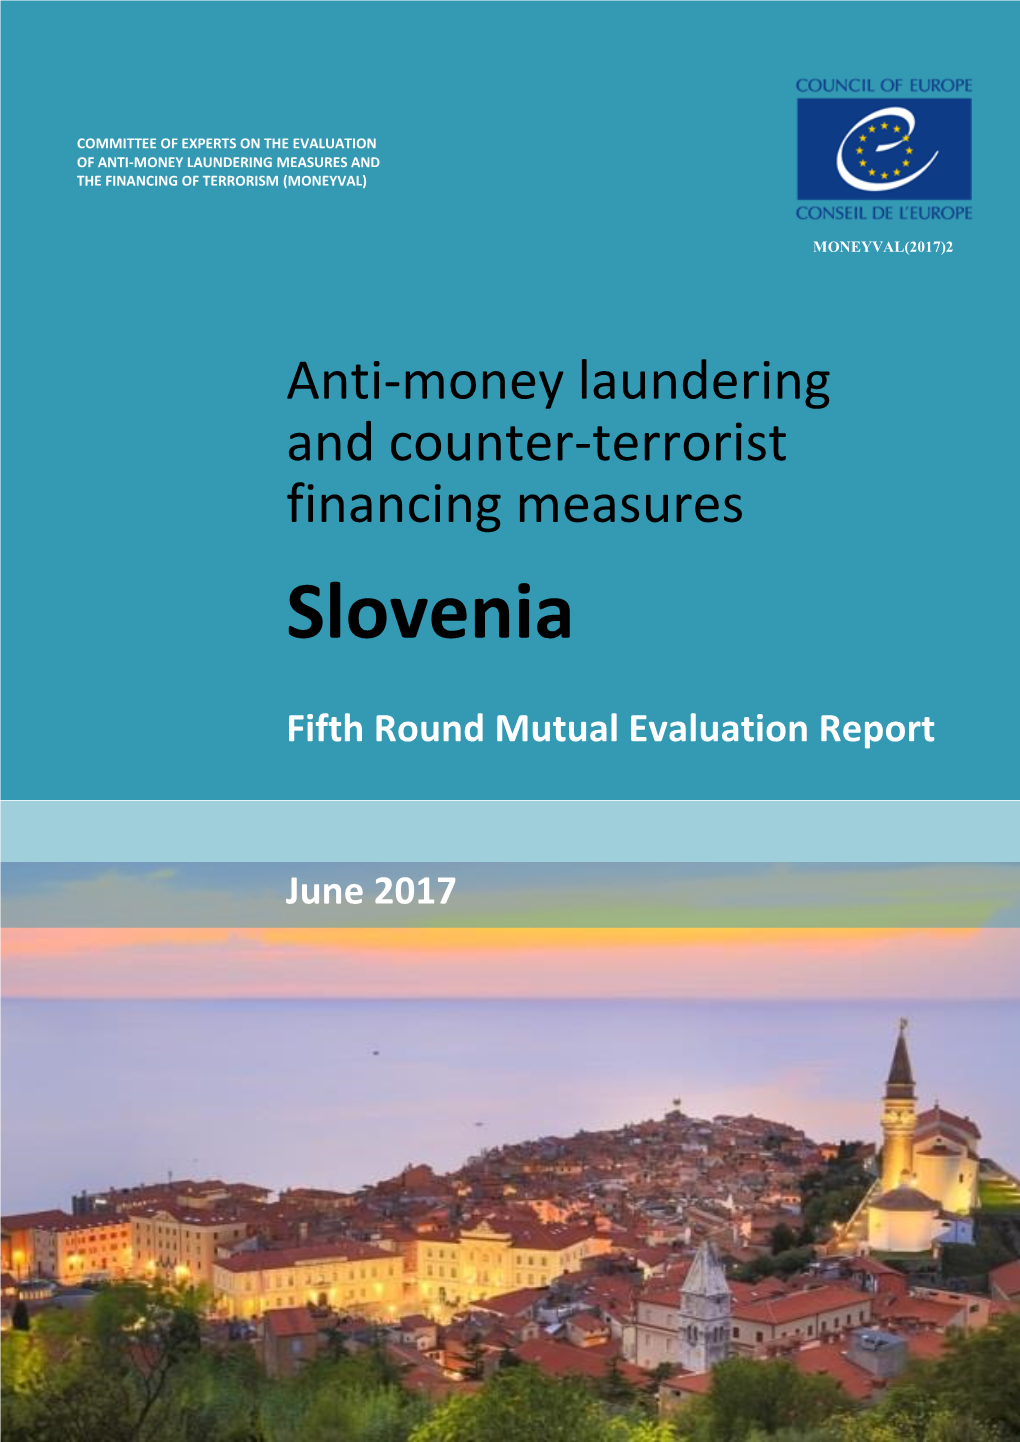 Moneyval) Committee of Experts on the Evaluation of Anti-Money Laundering Measures and the Financing of Terrorism (Moneyval) Moneyval(2017)2